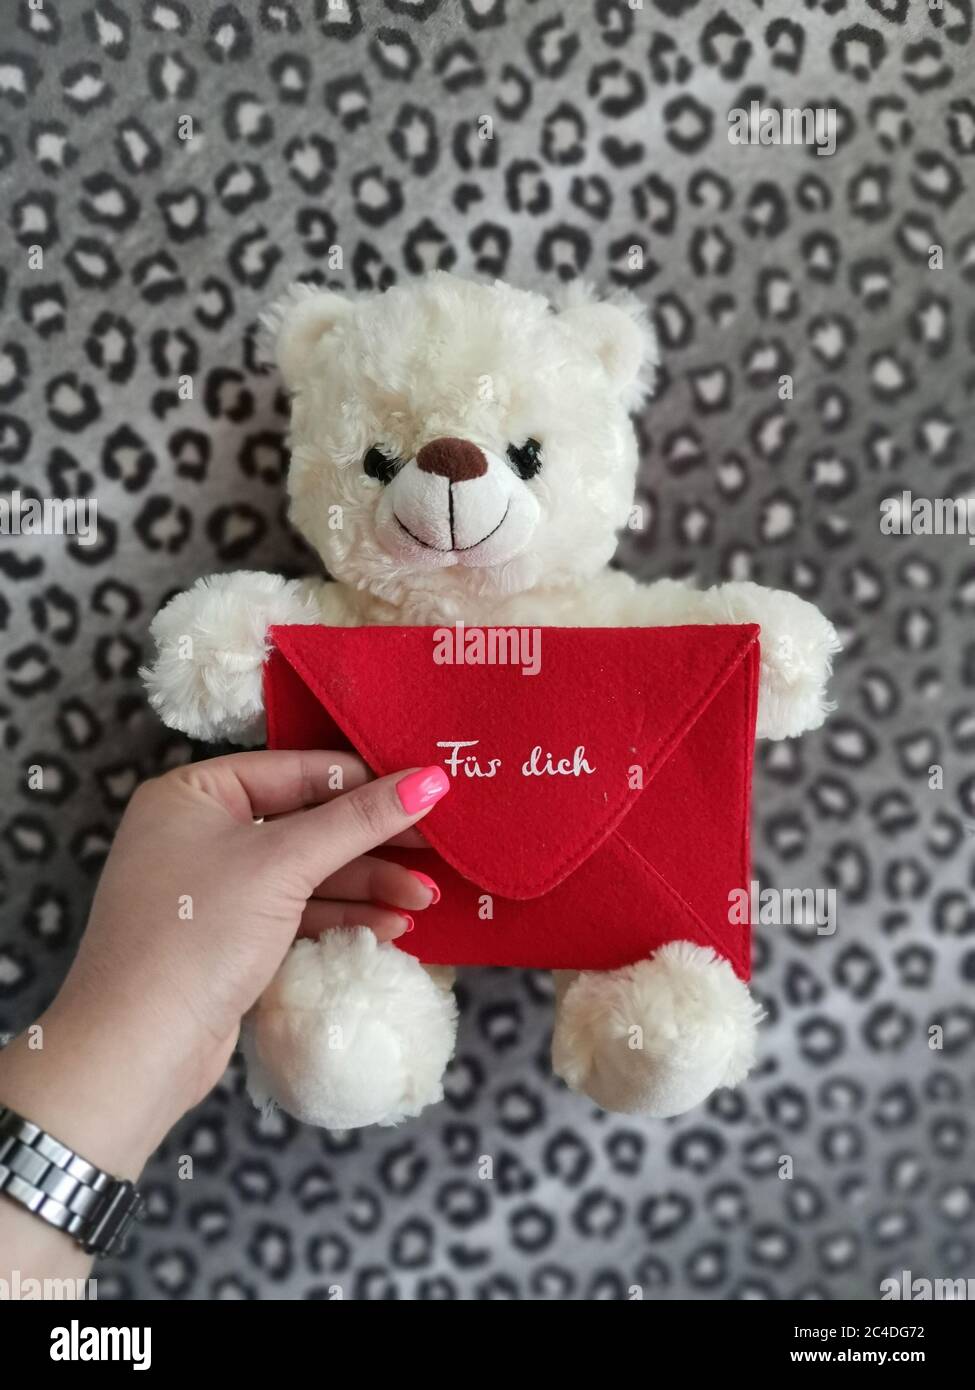 Teddy bear with an envelope and the inscription Für Dich Stock Photo